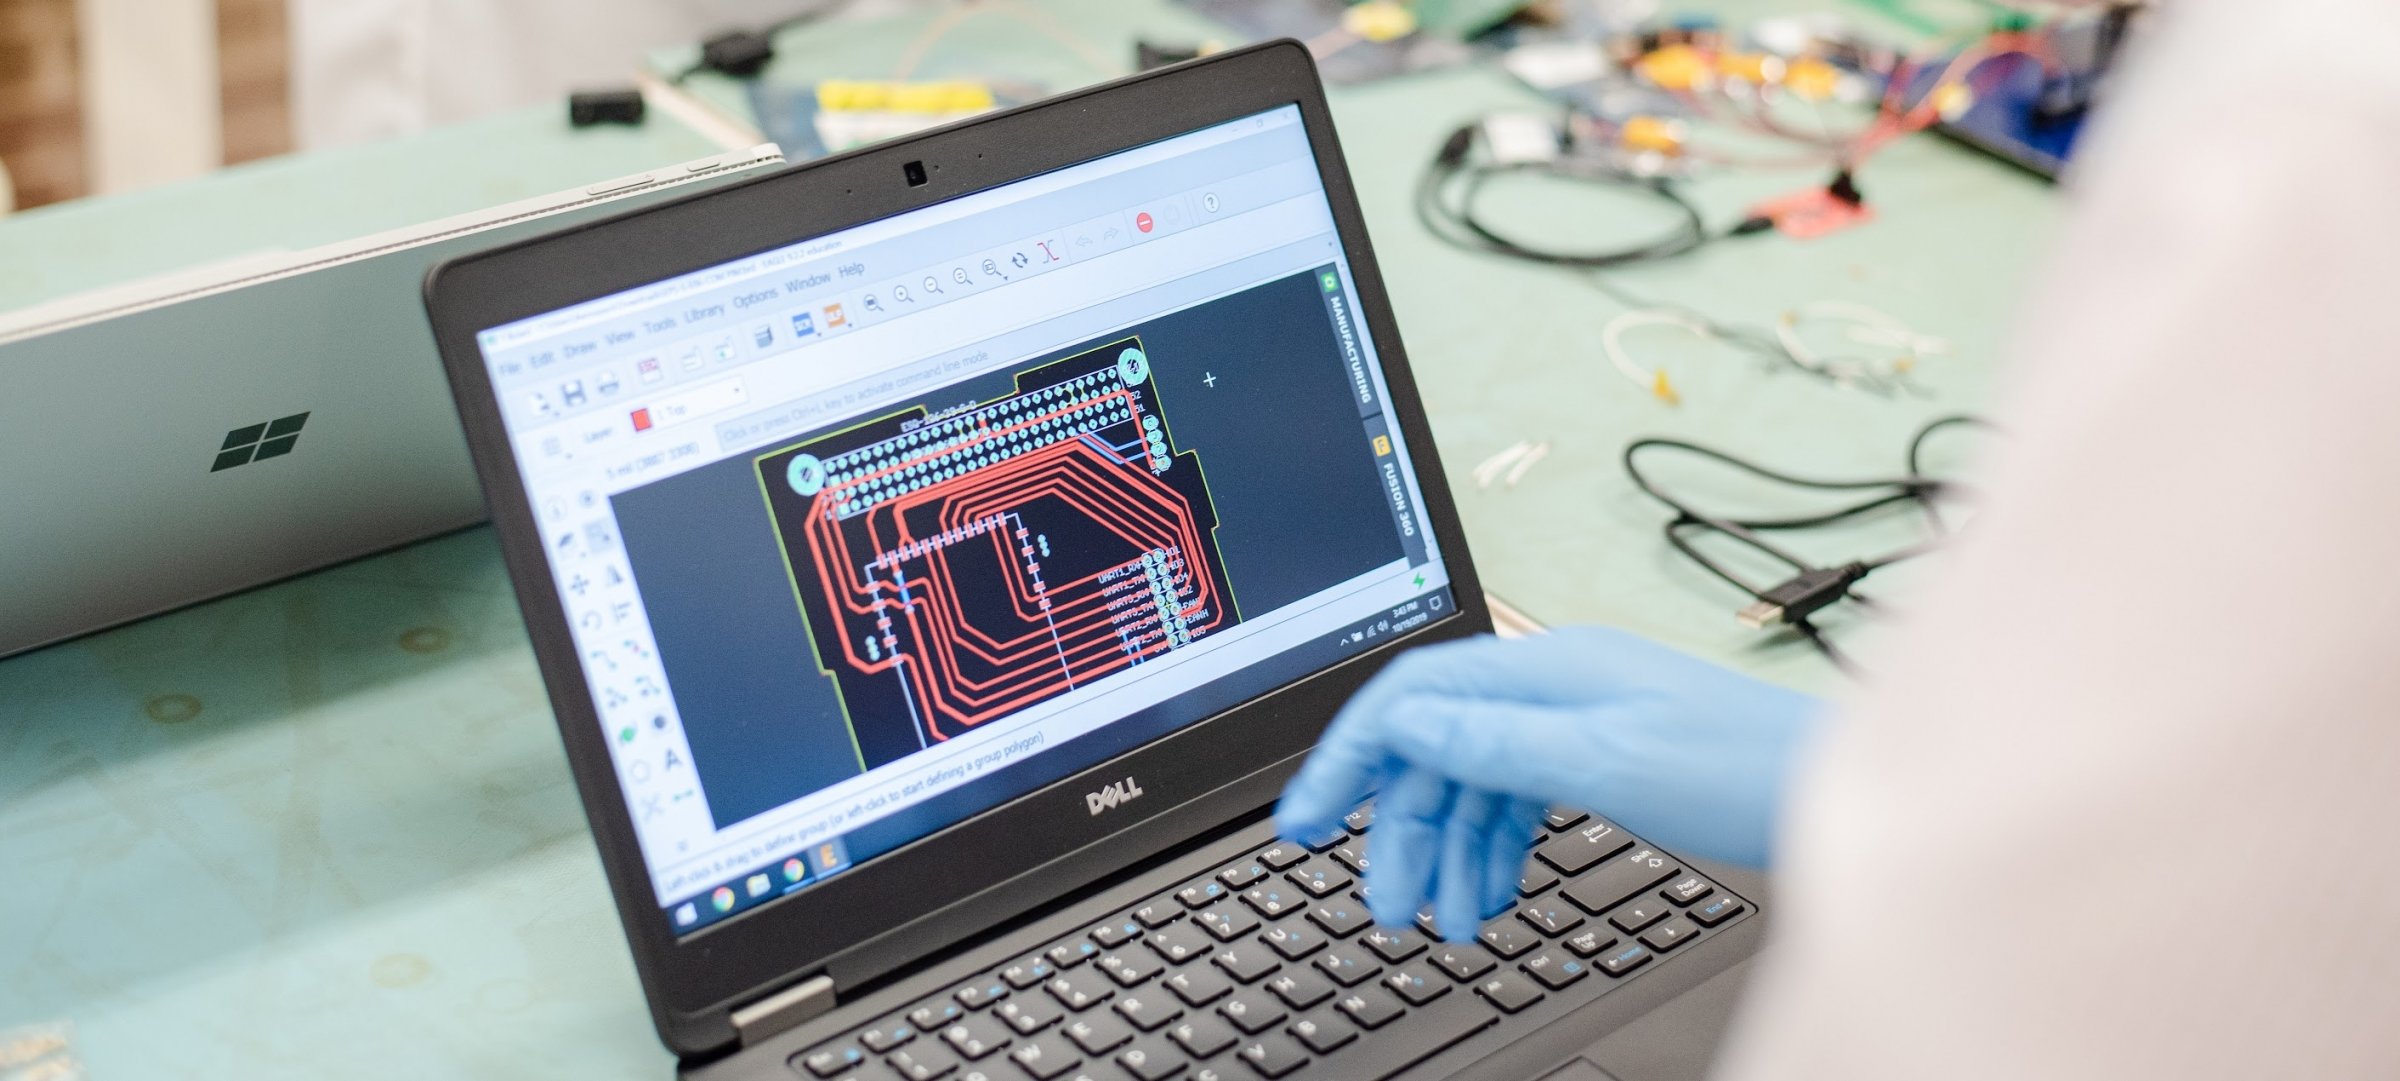 Displaying electrical software on a laptop in a lab.